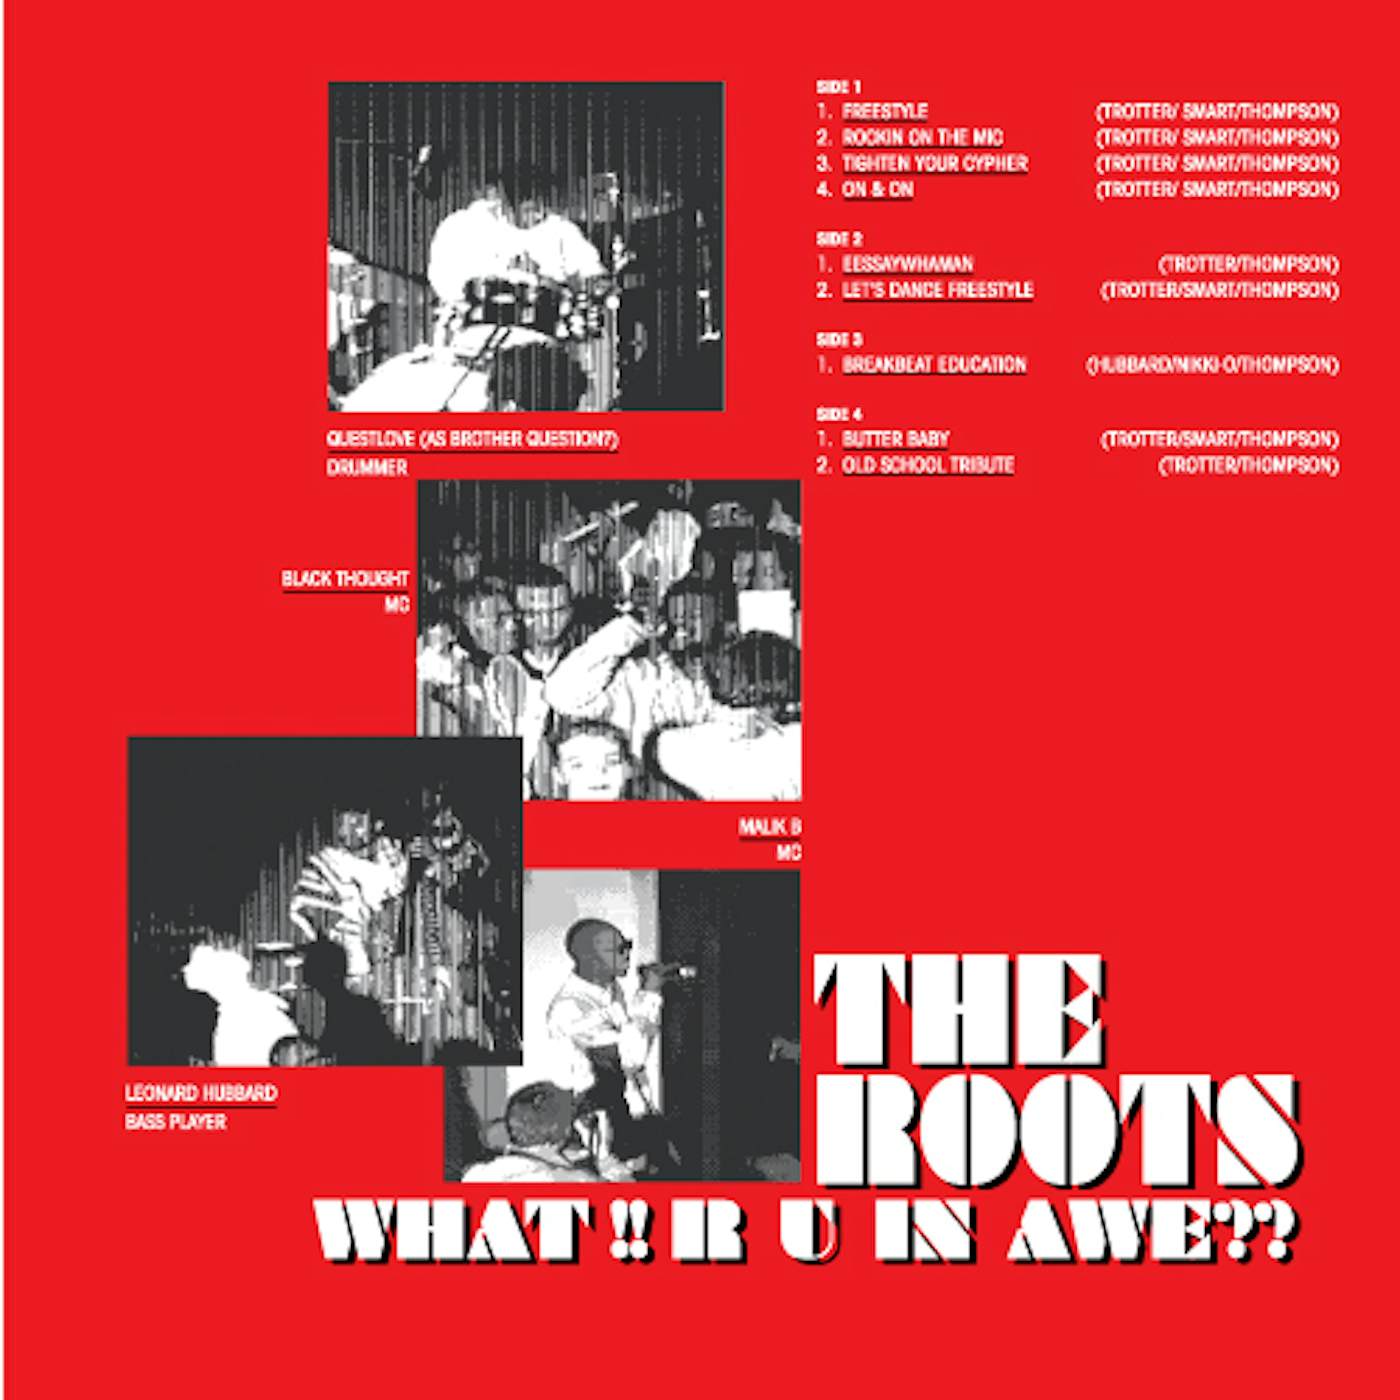 The Roots WHAT!! R U IN AWE?? Vinyl Record - Limited Edition